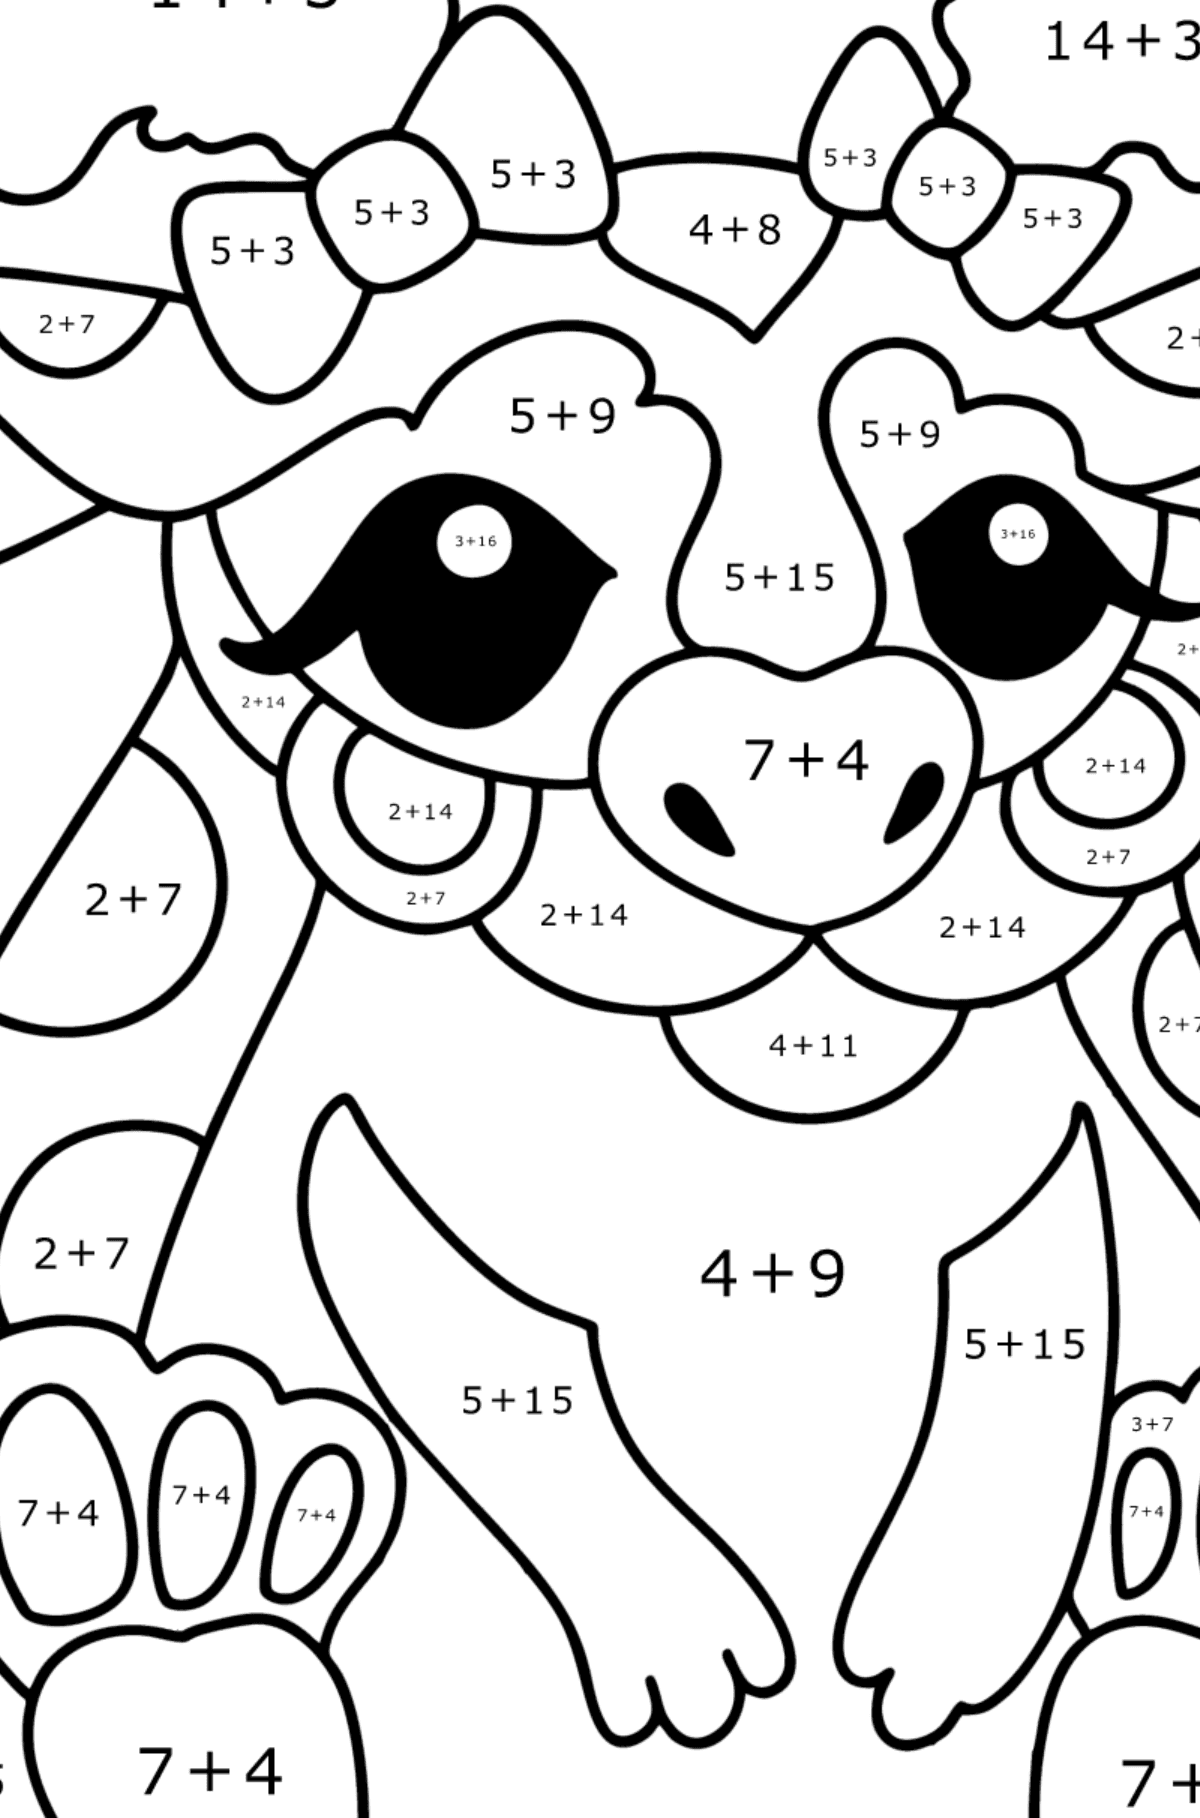 Dragon girl coloring page - Math Coloring - Addition for Kids